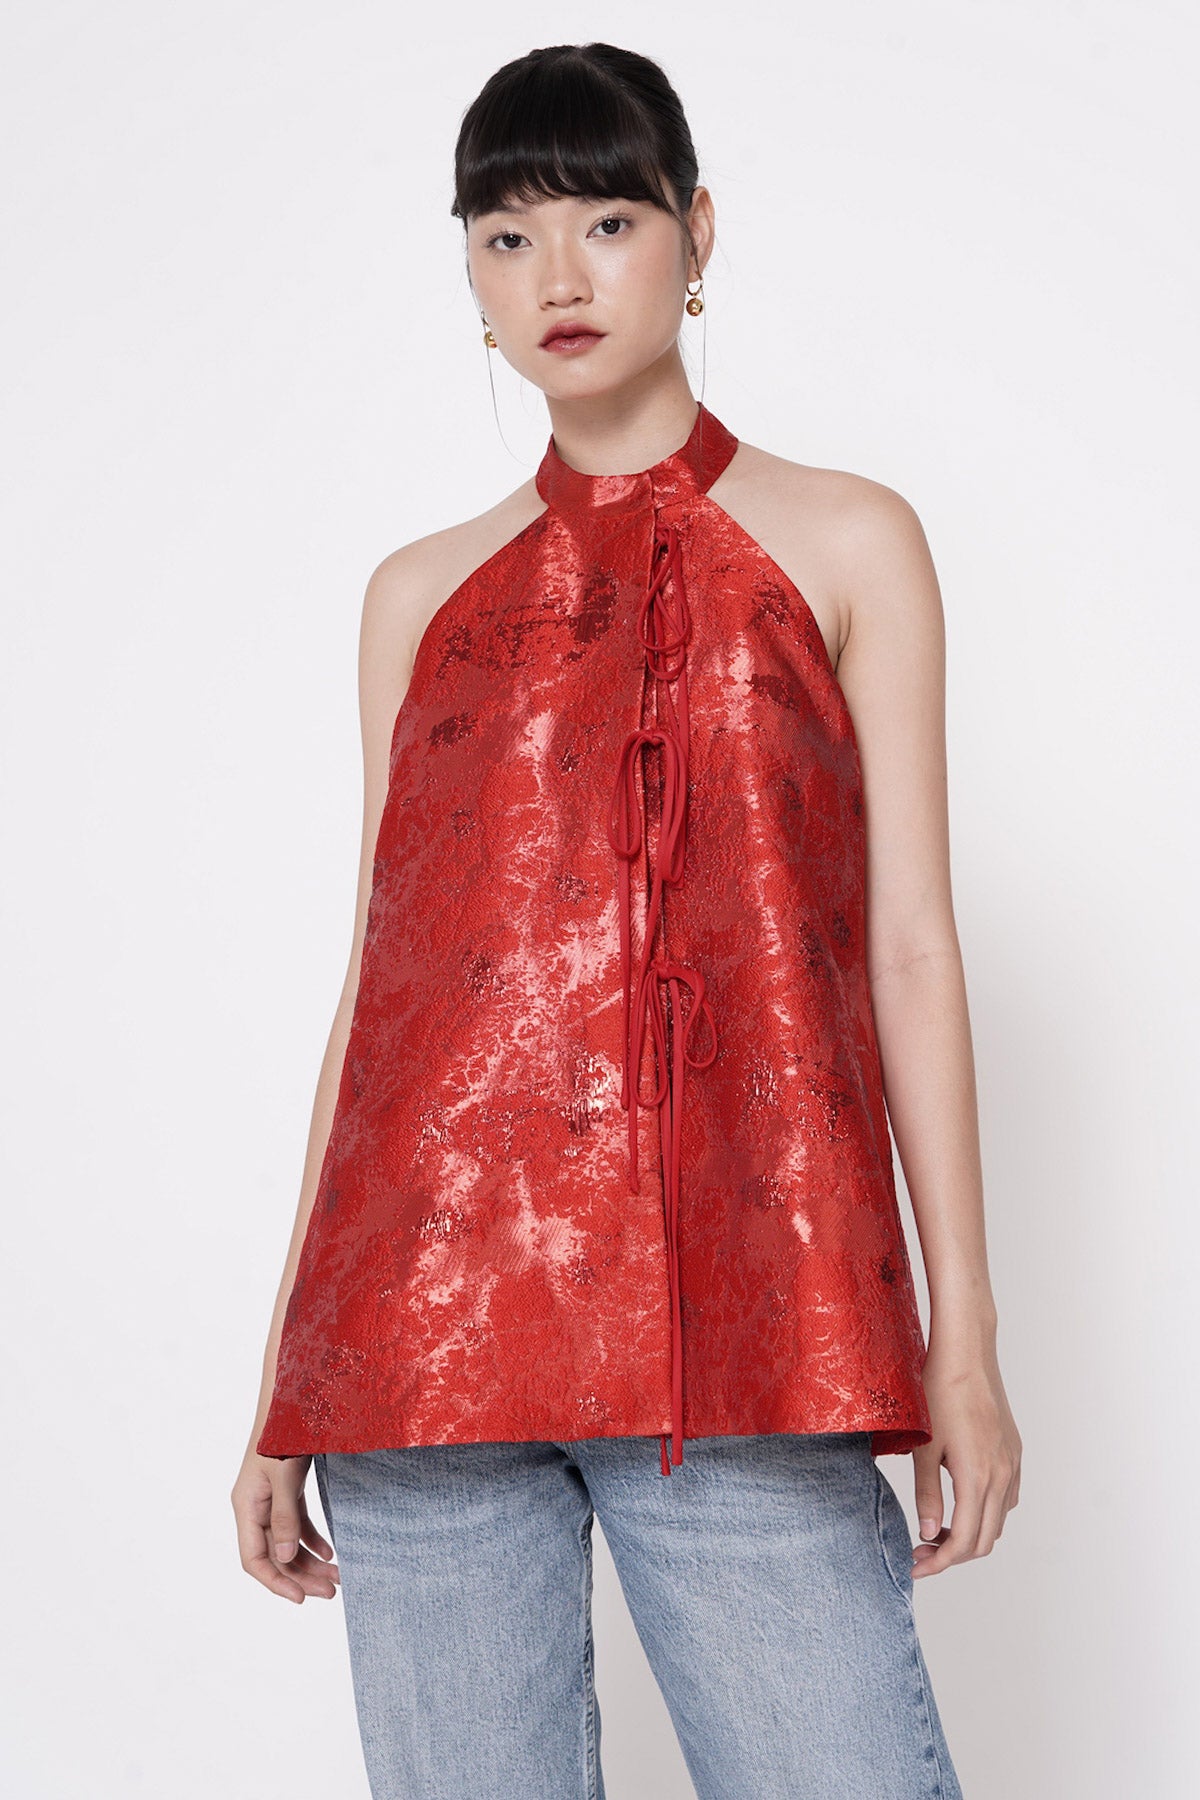 Lotus Top In Red (LAST PIECE)